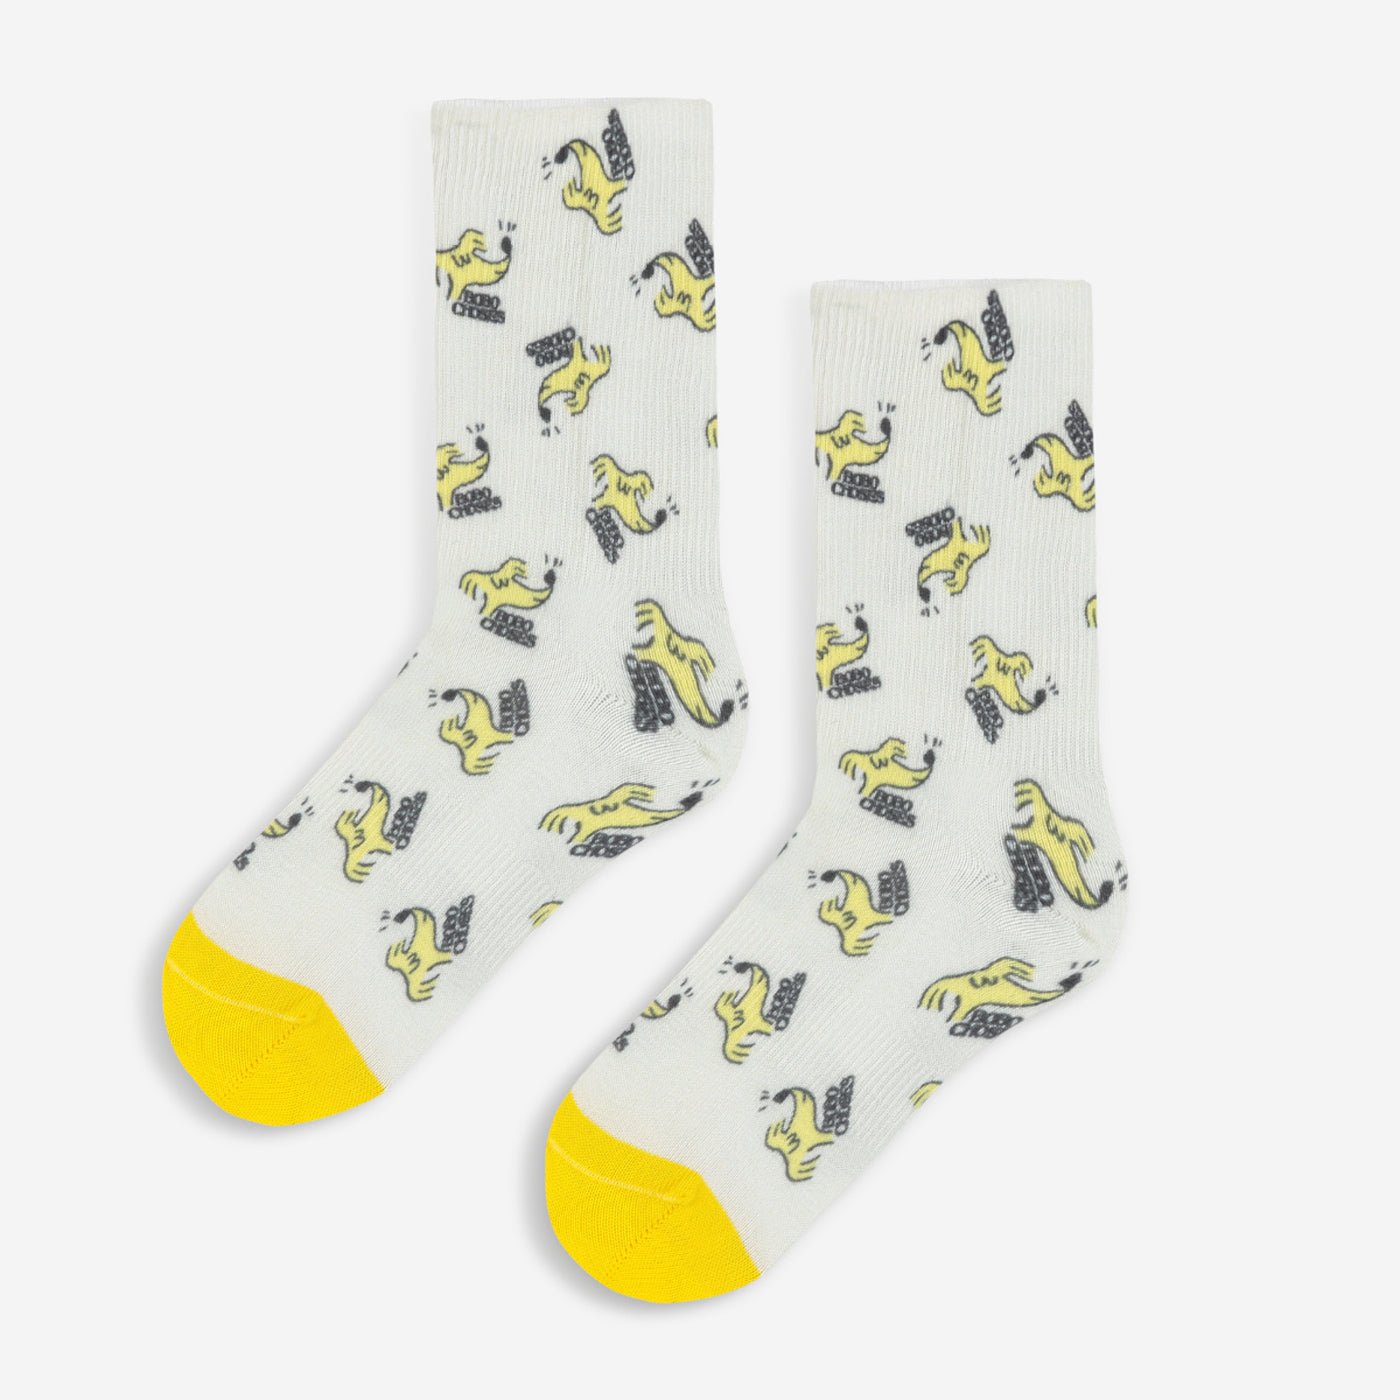 Sniffy Dog All Over Long Socks by Bobo Choses - Petite Belle